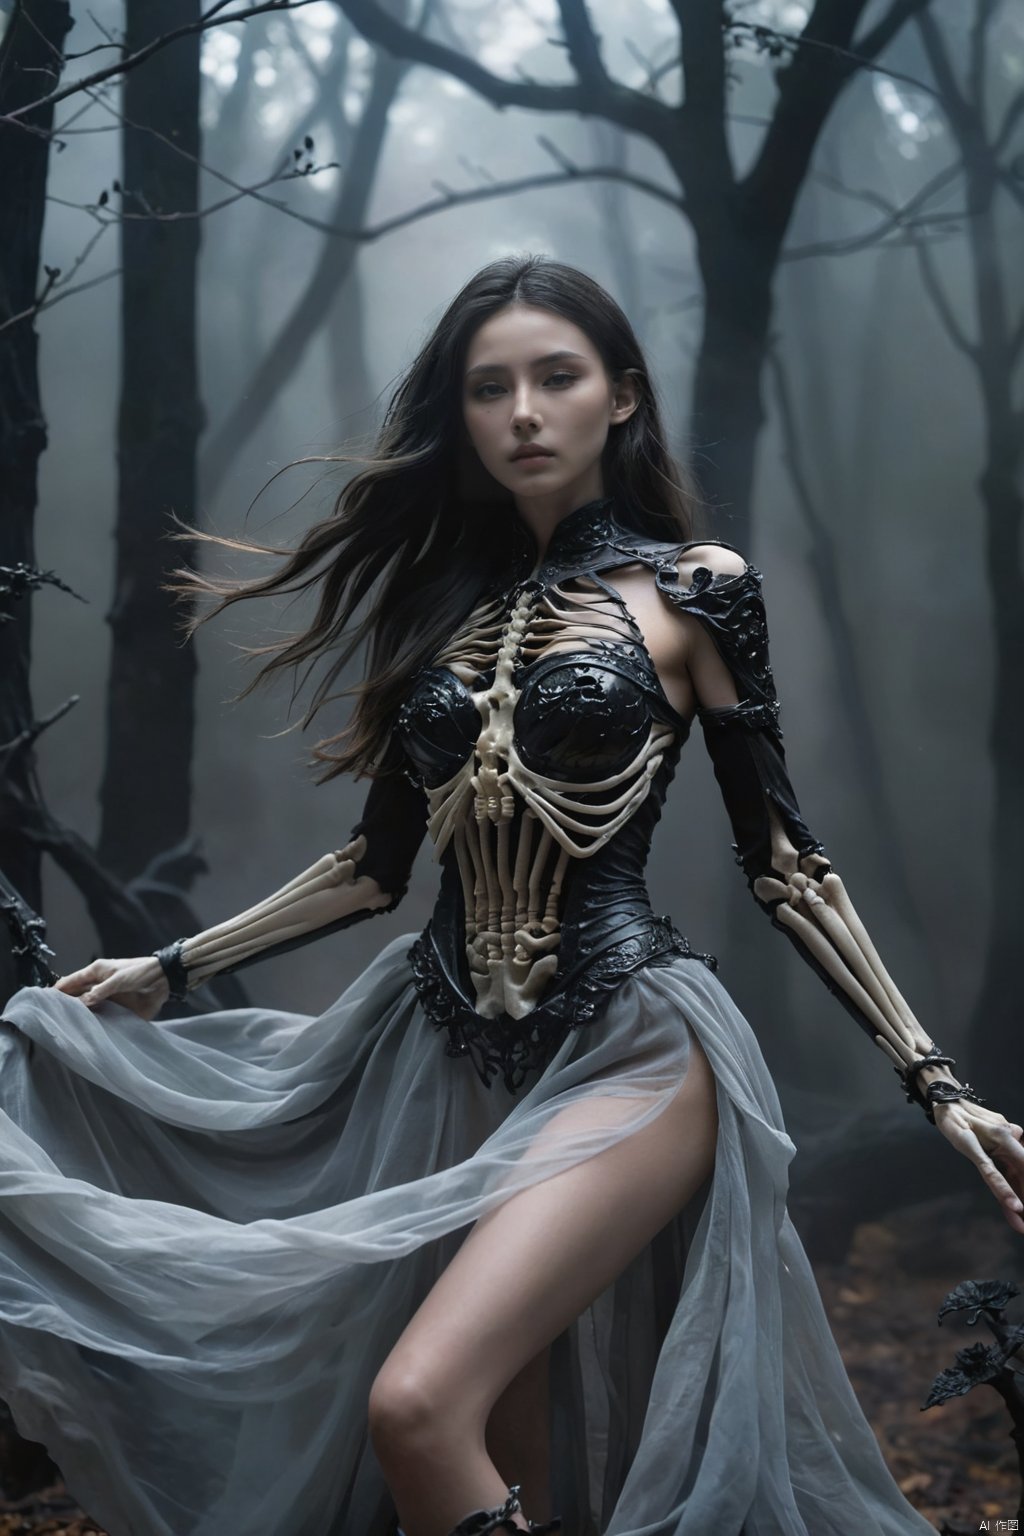  hubg_beauty_girl,
The Skeleton young Witch, flying, epoxy_skull, amidst a black swirling vortex in a dark, mystical forest. A beautiful woman with long hair stands, her figure draped in skeletal armor and an ethereal dress, engulfed by the swirling darkness. The scene is intensely cinematic, dominated by deep shadows pierced by subtle hints of light, crafting a dramatic interplay of darkness and luminescence. Wind, intensified to 1.2, weaves through the trees, enhancing her enigmatic silhouette, now surrounded by black smoke and the eye of a storm. Close-up on her sad expression, amidst sparkling embers and a billowing long piece of cloth, , HUBG_Chinese_Jade